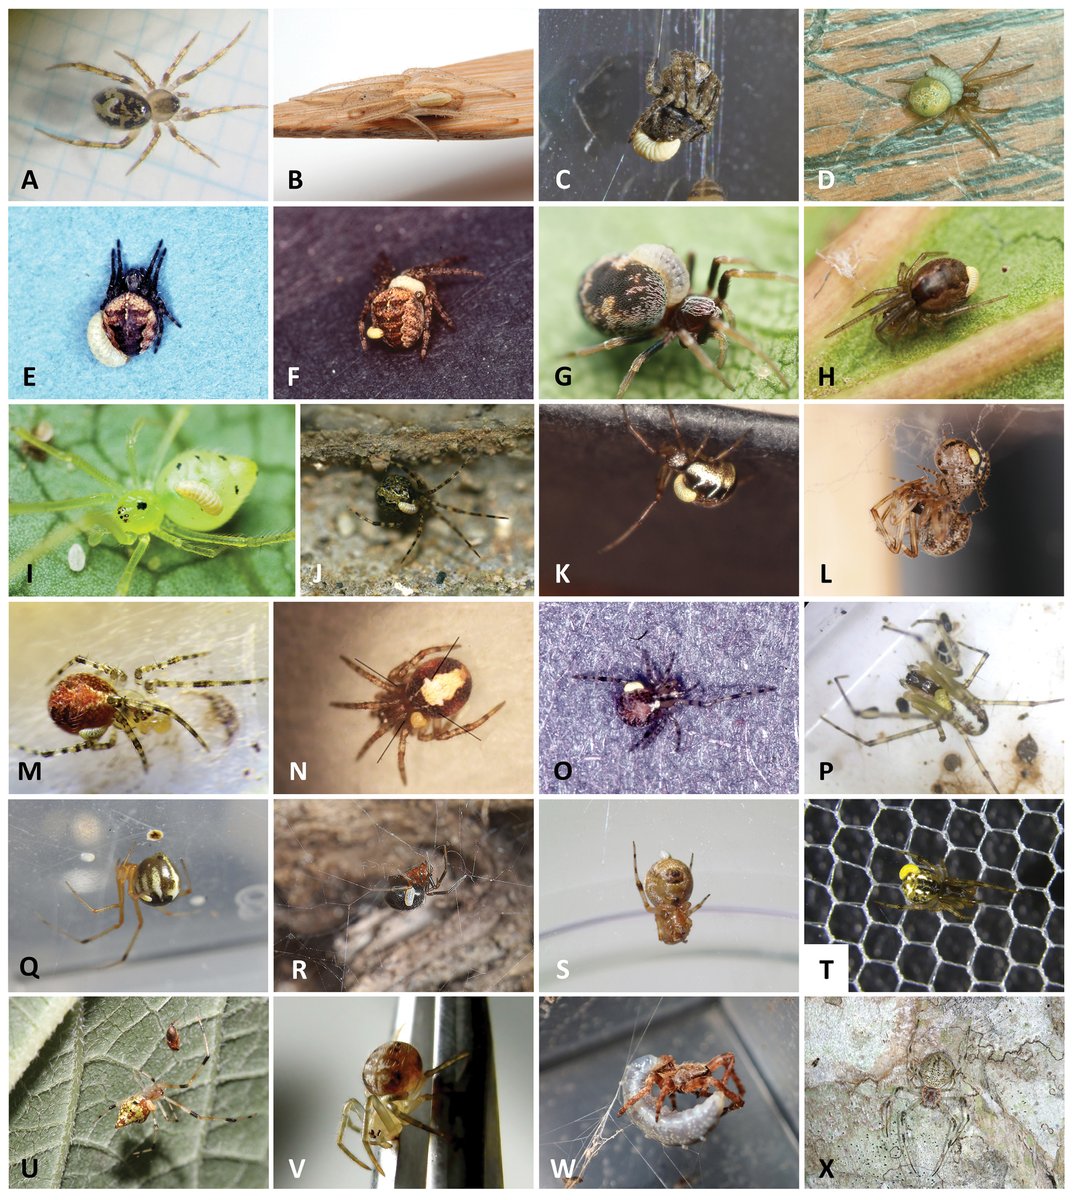 Parasitoid wasps that prey on spiders, subjugating them to lay eggs, changing behaviour and altering web spinning behaviour. Spectacular evolutionary diversity and intriguing biology in the Pimplinae from @Reclinervellus Keito Takasuka and @BroadGavin doi.org/10.1163/187598…